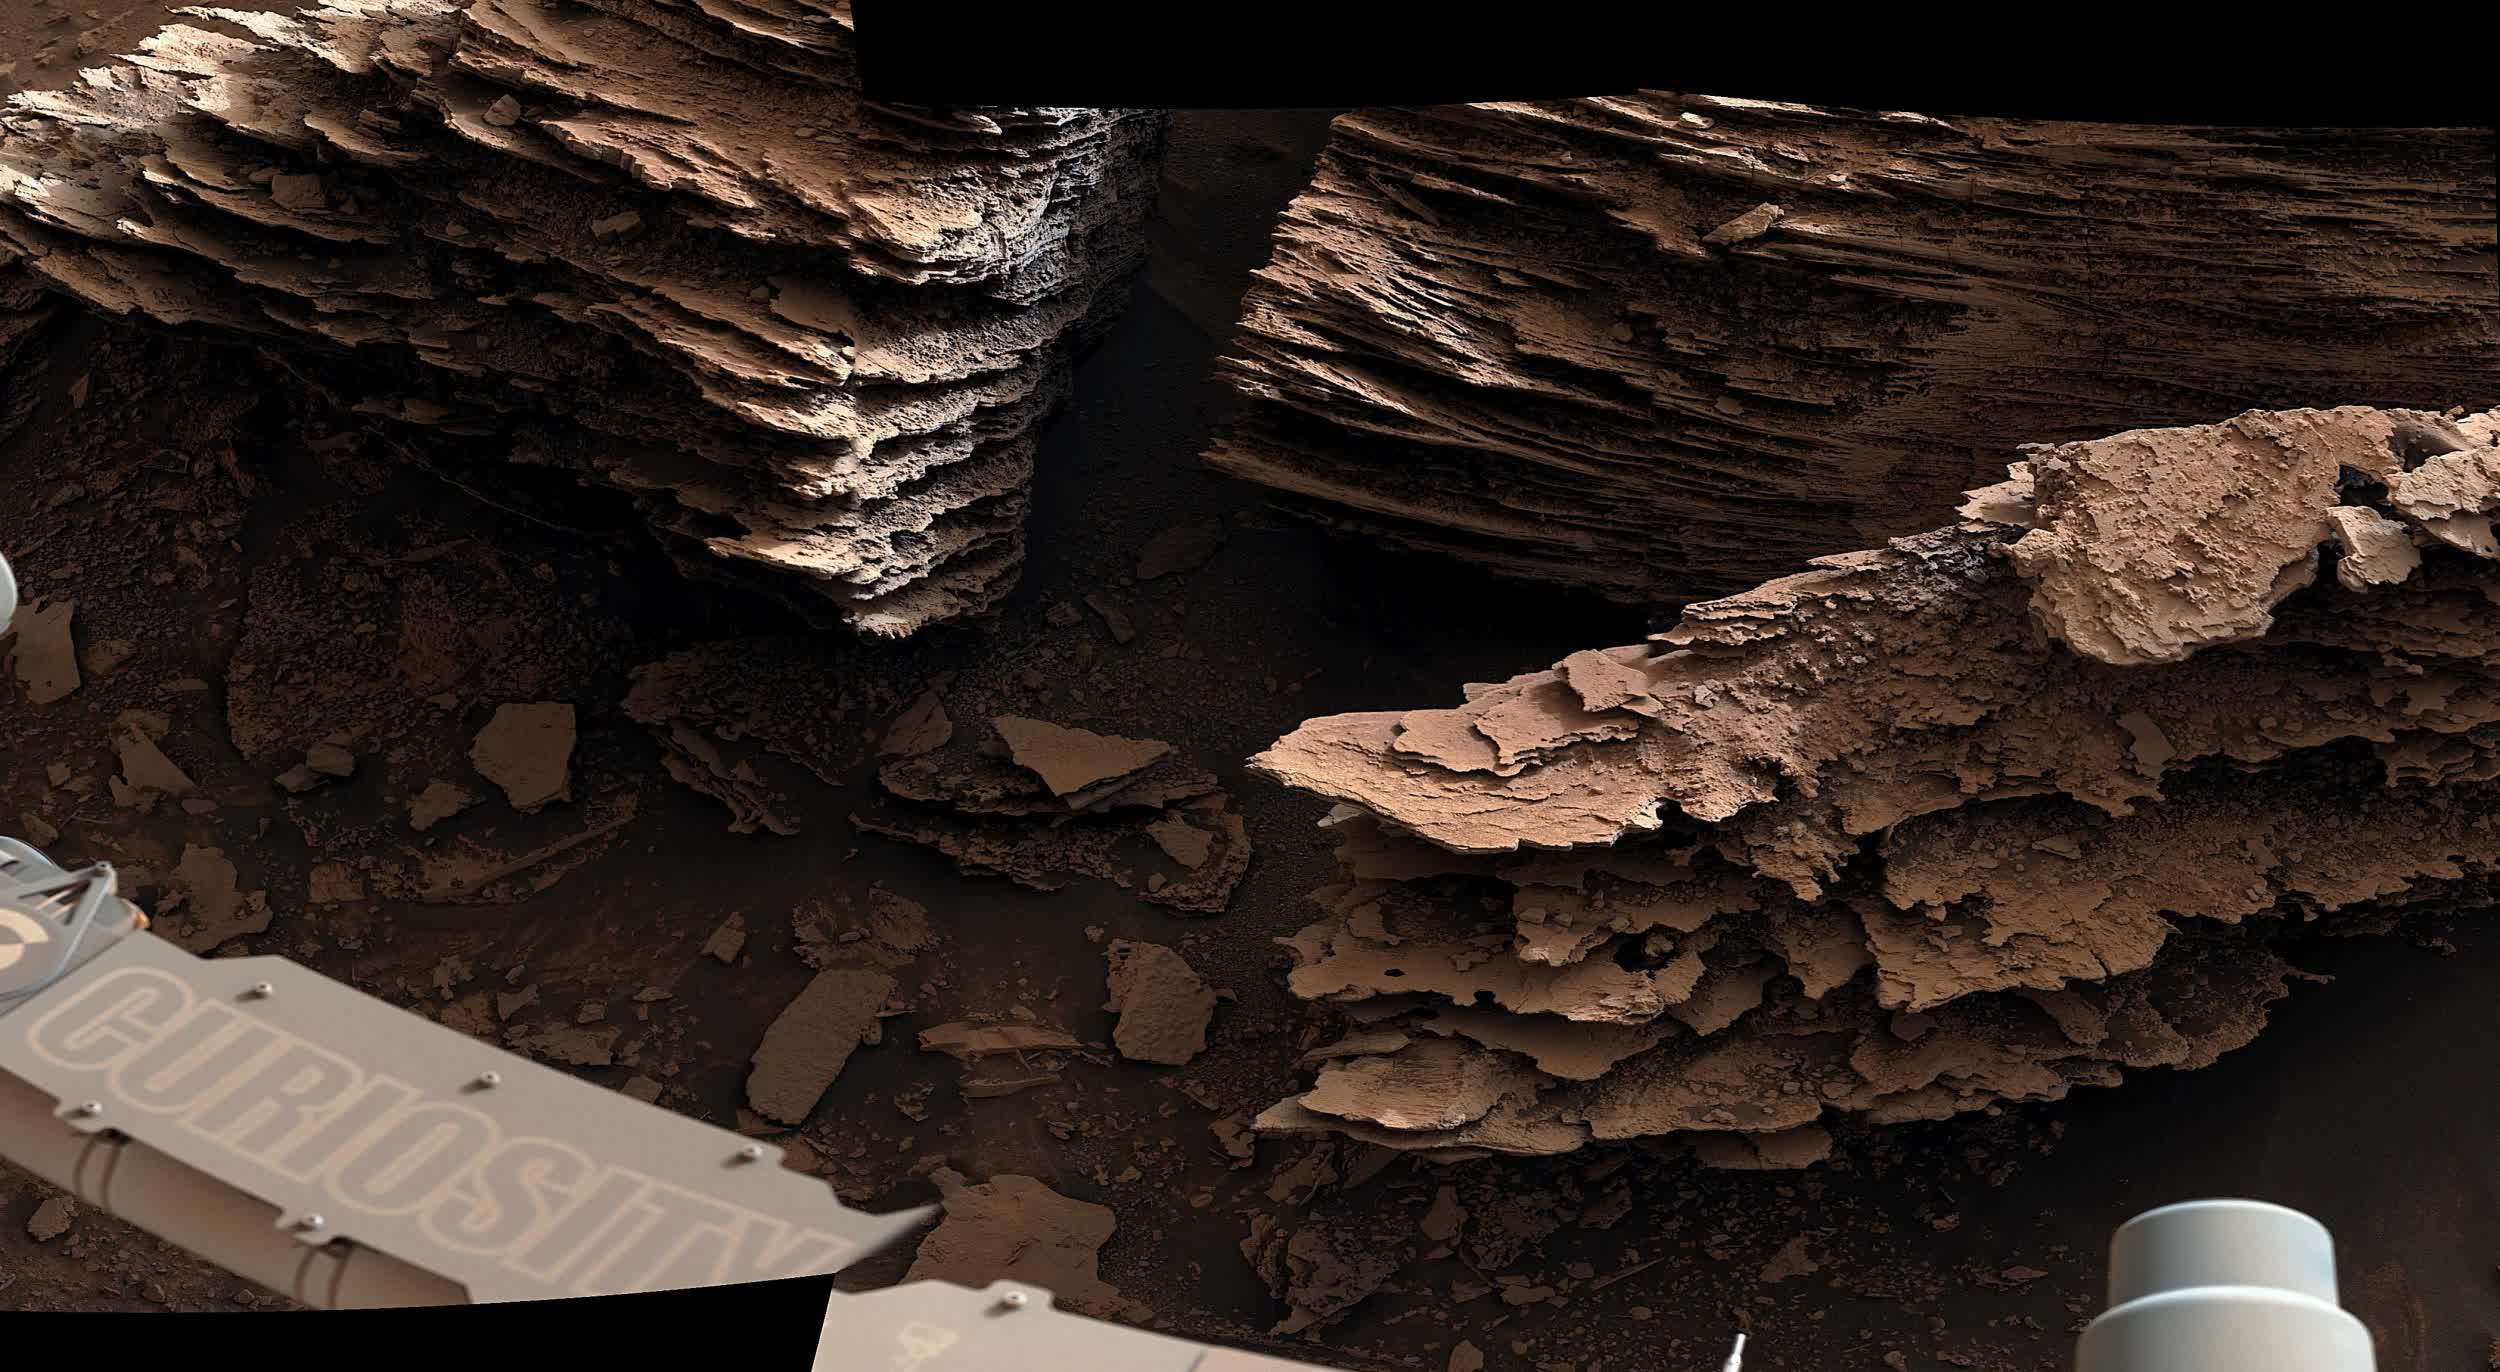 Curiosity rover finds more evidence of ancient watery regions on Mars